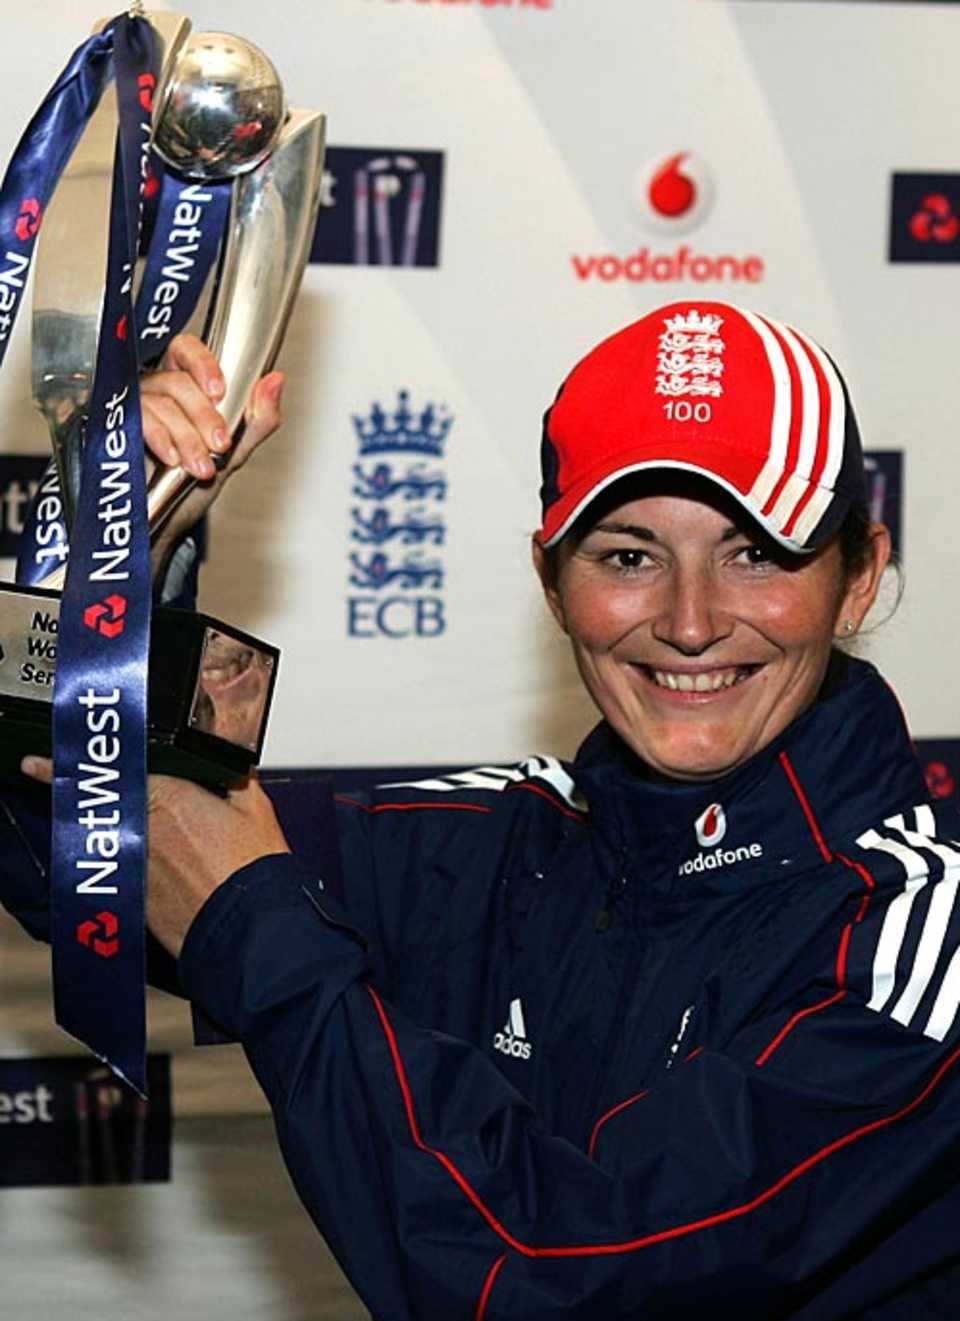 England captain Charlotte Edwards poses with NatWest trophy after winning the five-match ODI series against India 4-0 